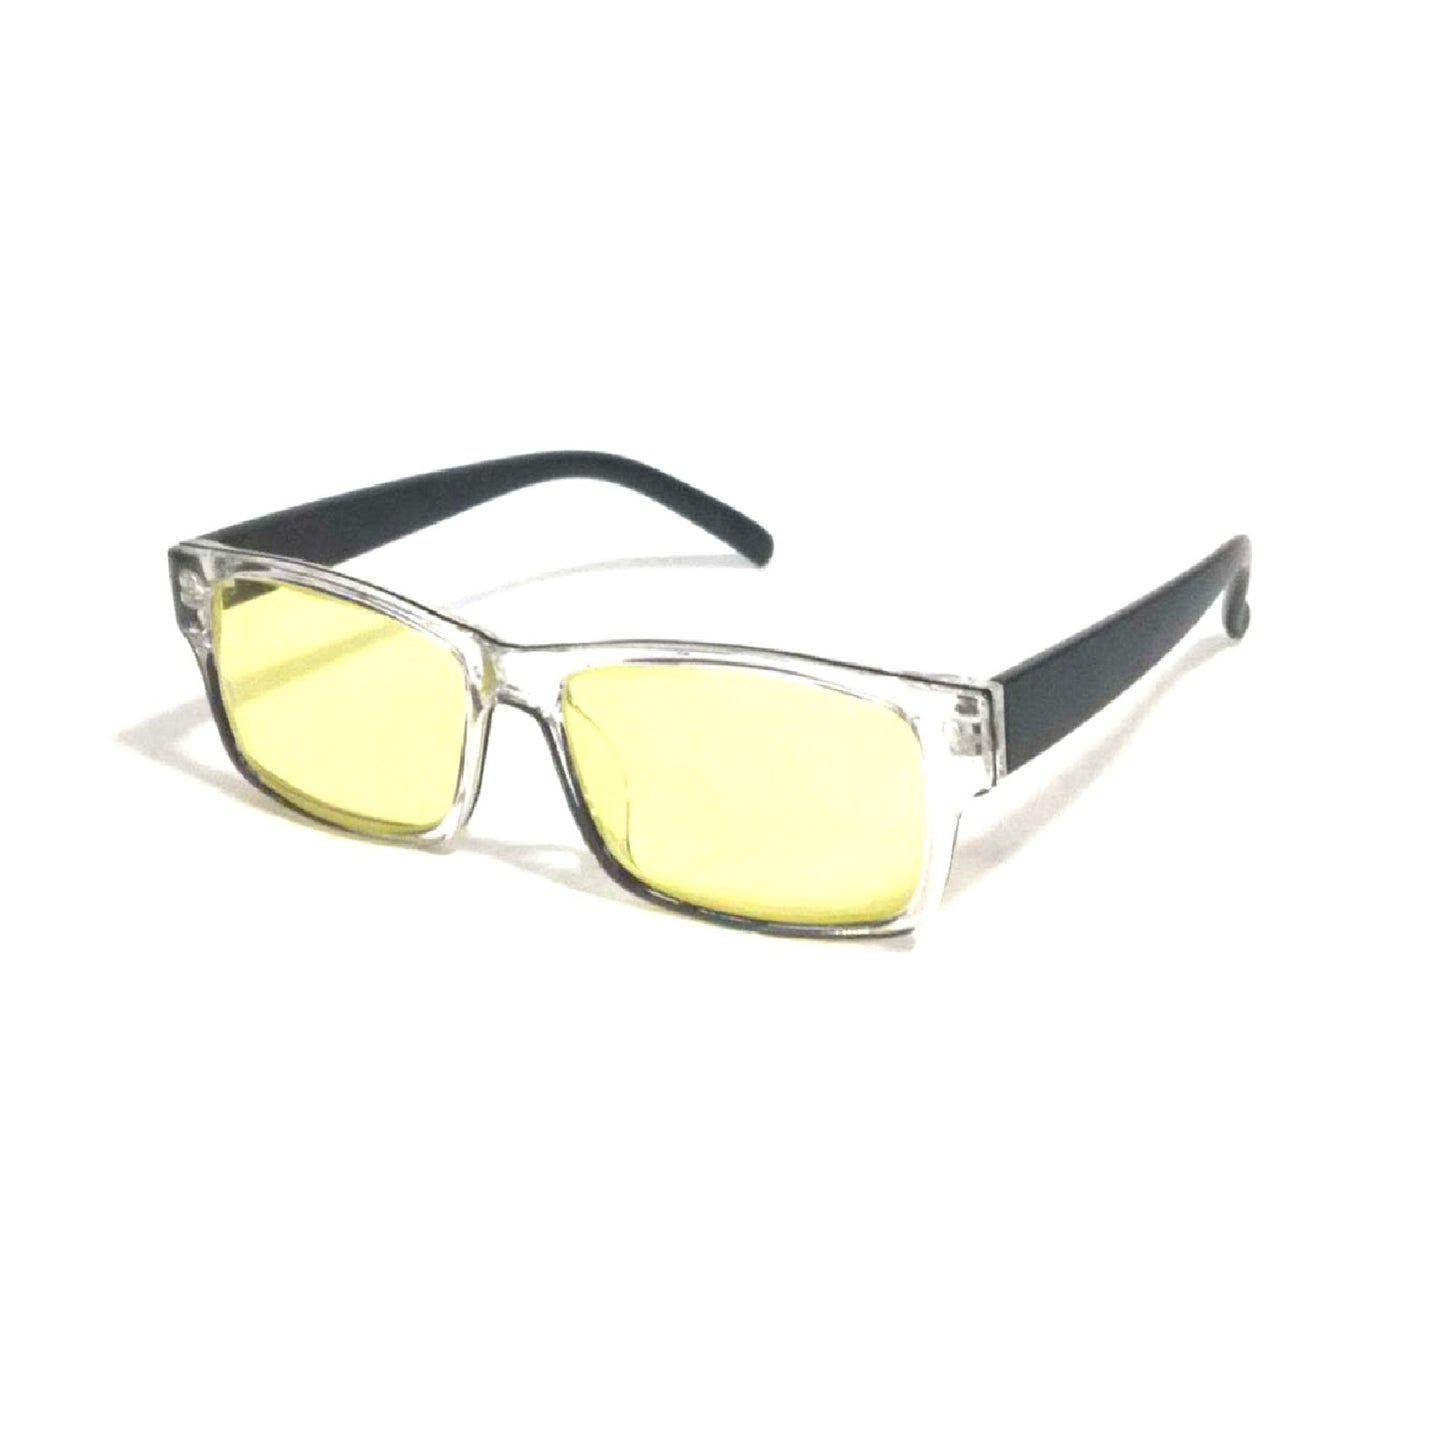 Latest Fashion Rectangle Night Driving Glasses for Men and Women with Anti Glare Coating